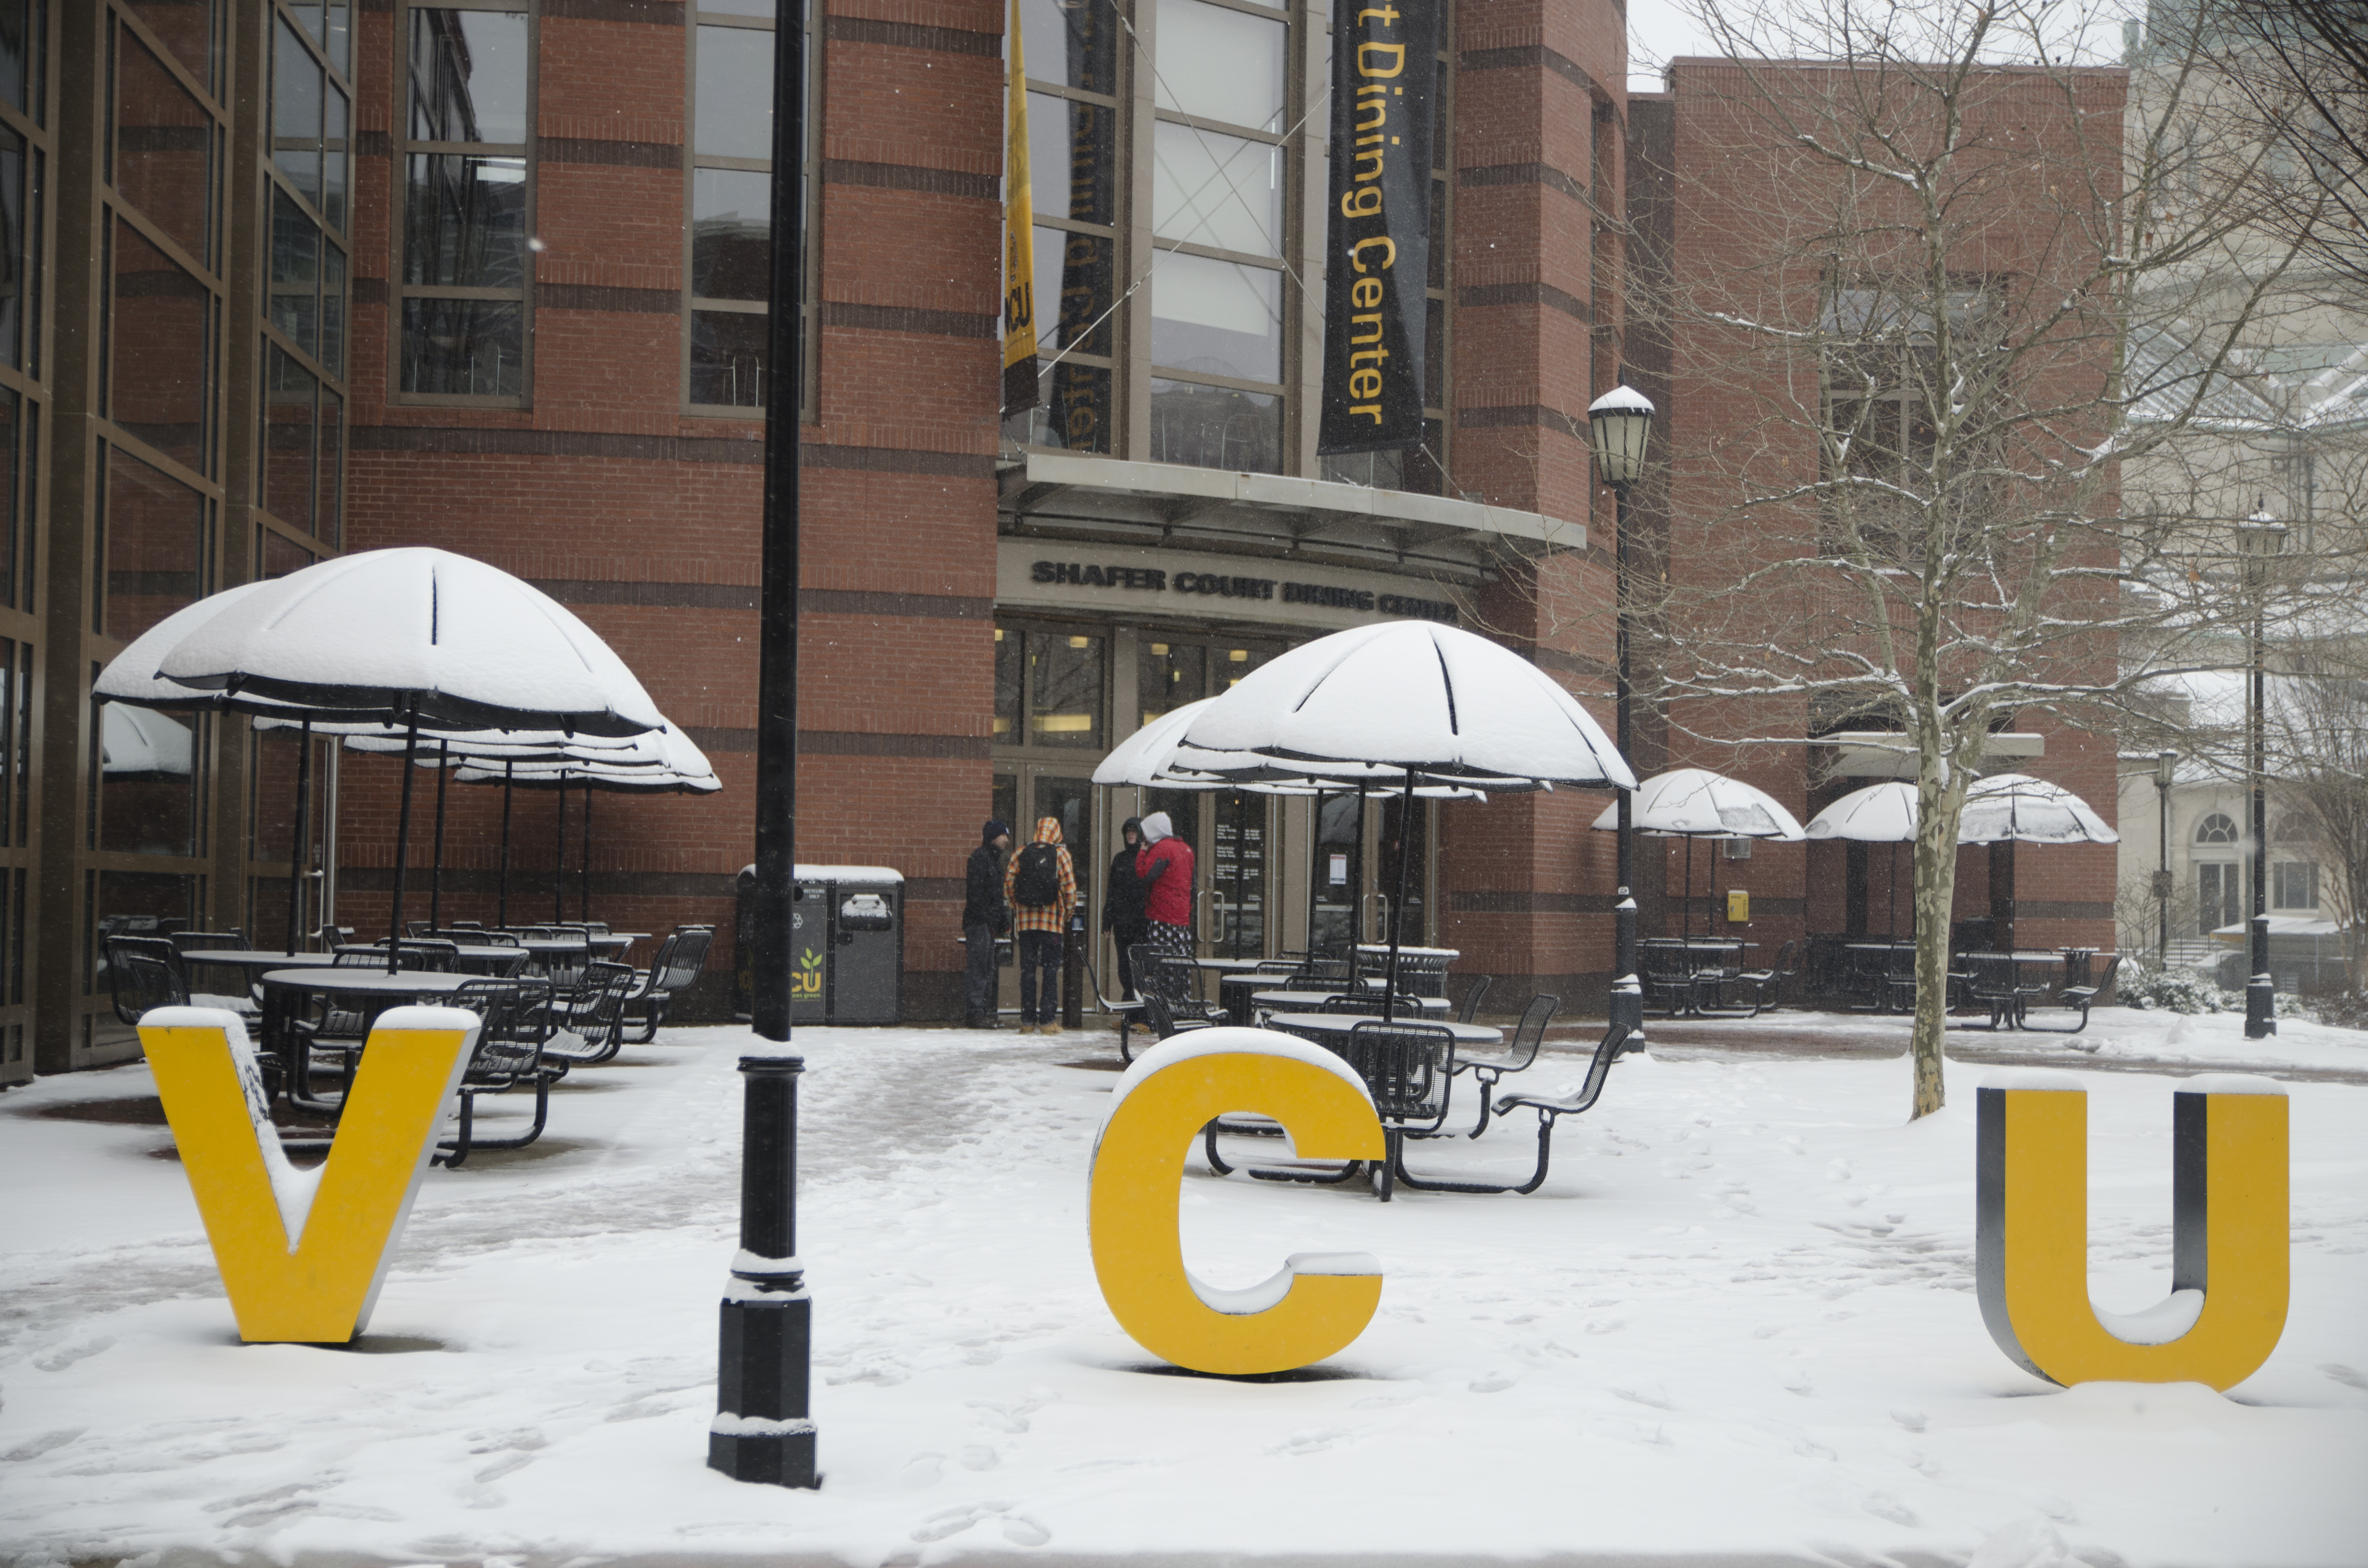 Outside Shafer Court on a snowy day. The gold VCU letters have snow on top of them. Four students are standing in the entryway of Shafer Court Dining Center.